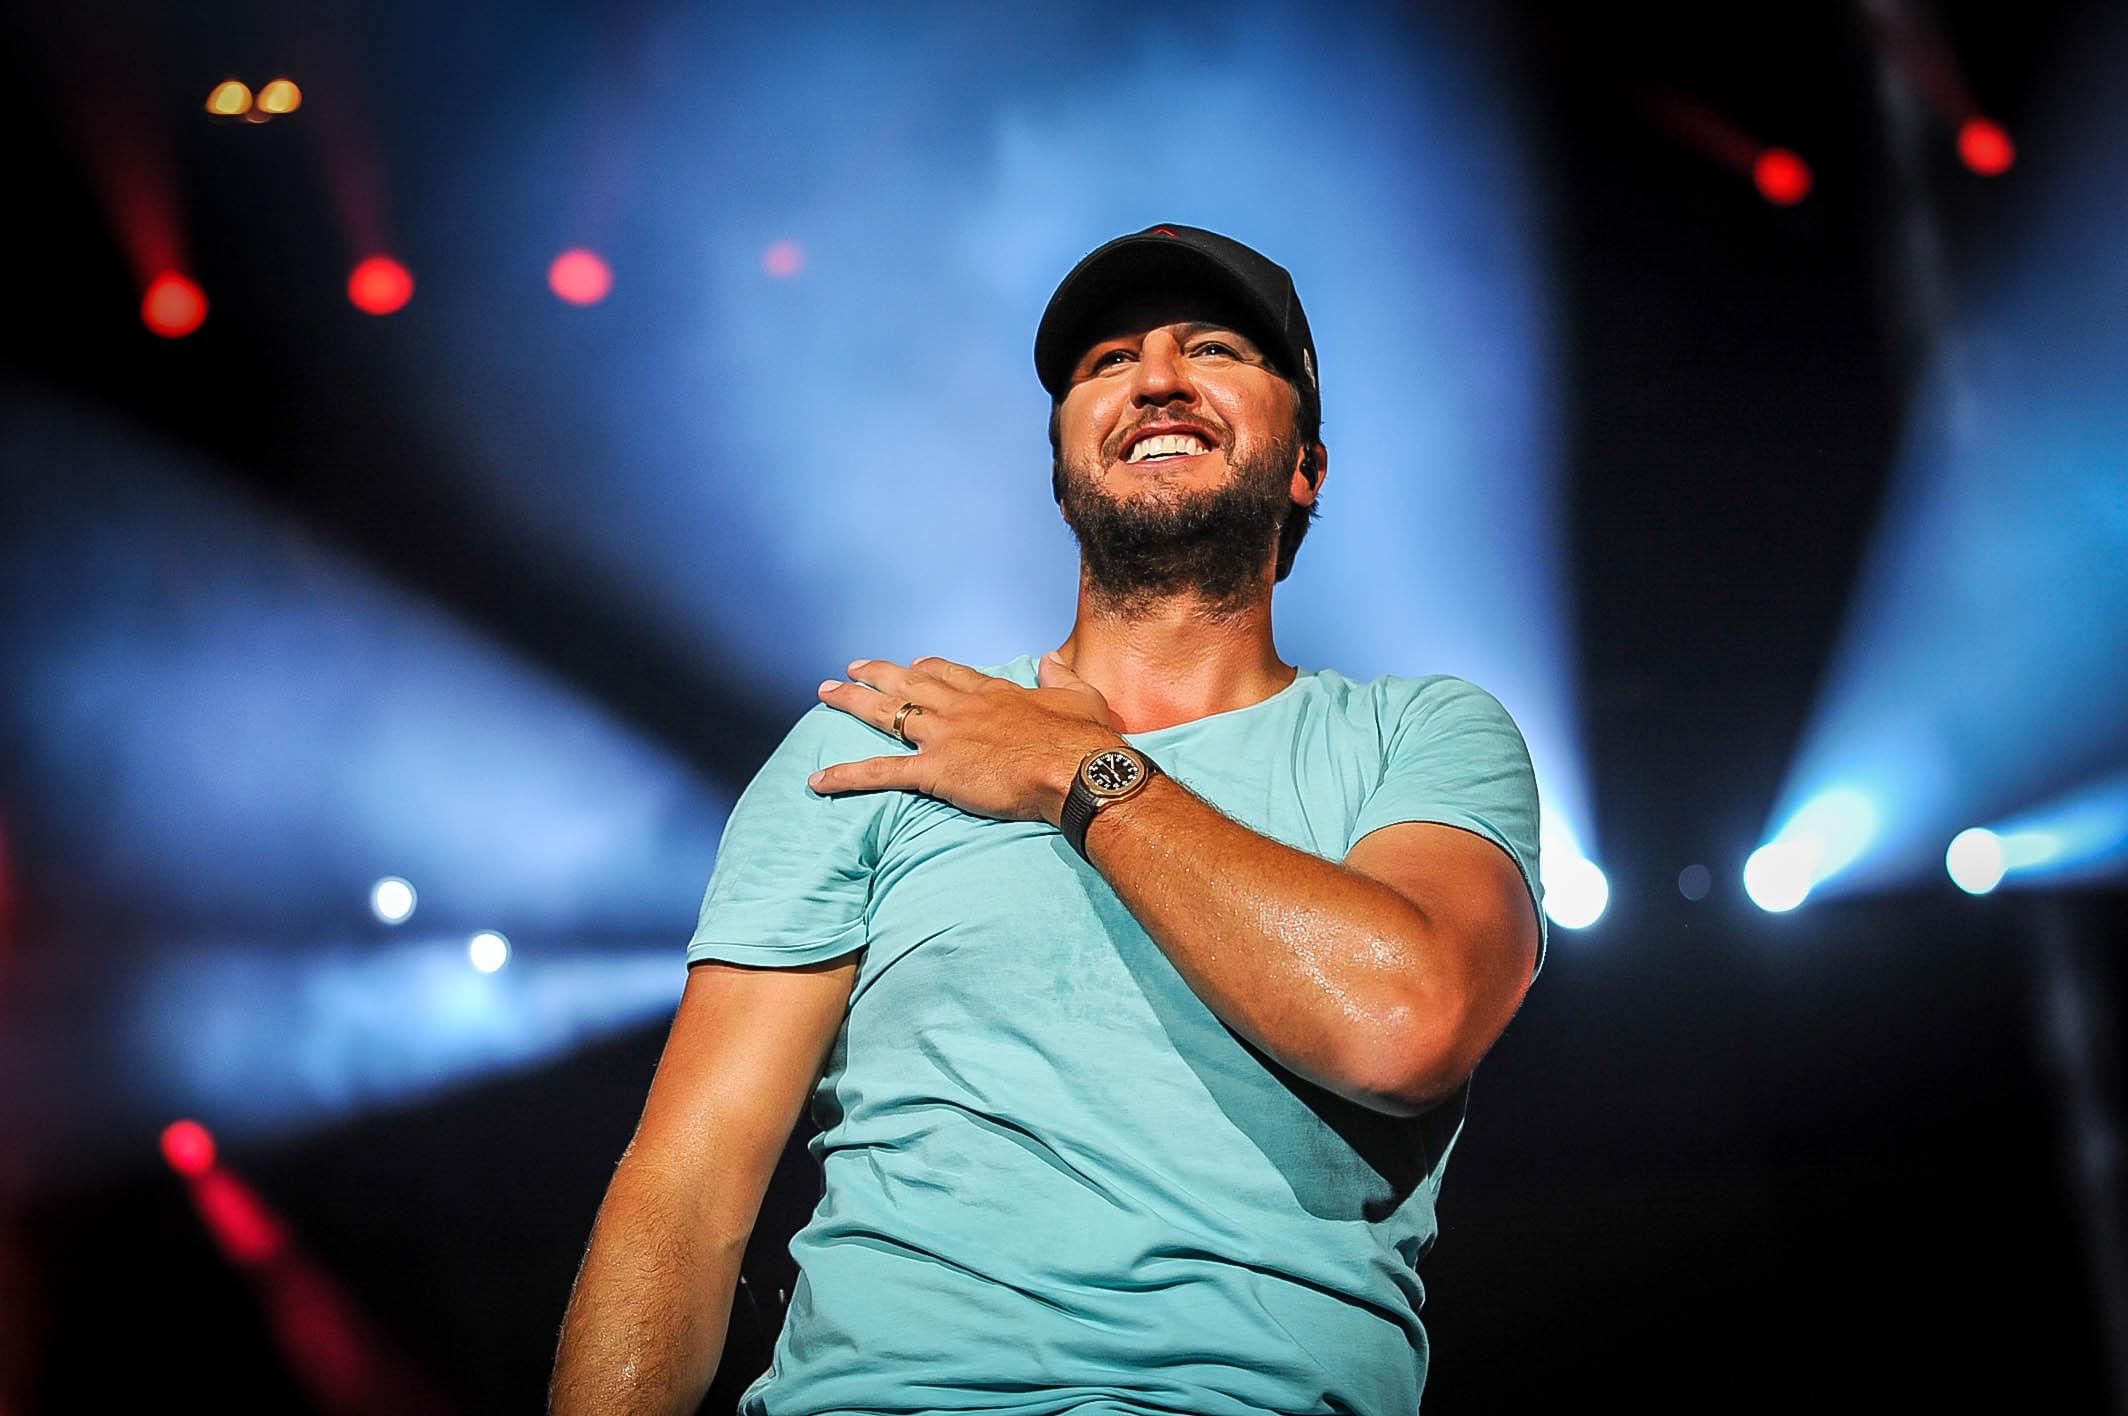 Luke Bryan’s What Makes You Country Tour Photos | 9.8.18